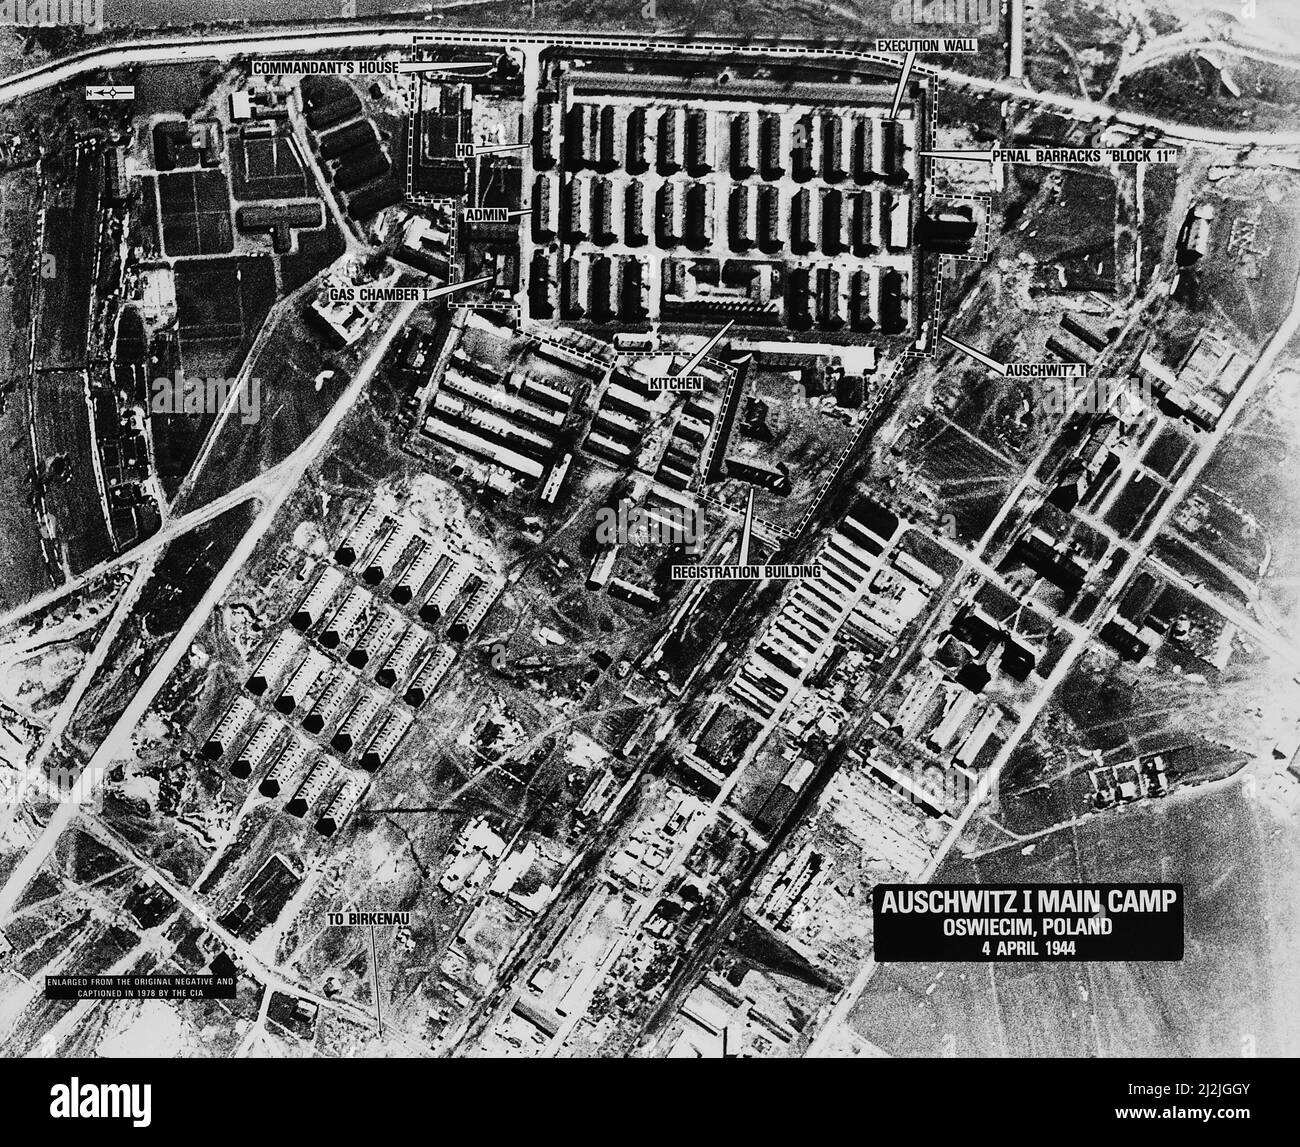 An aerial reconnaissance photograph of the Auschwitz concentration camp showing the Auschwitz I camp, April 1944 Stock Photo